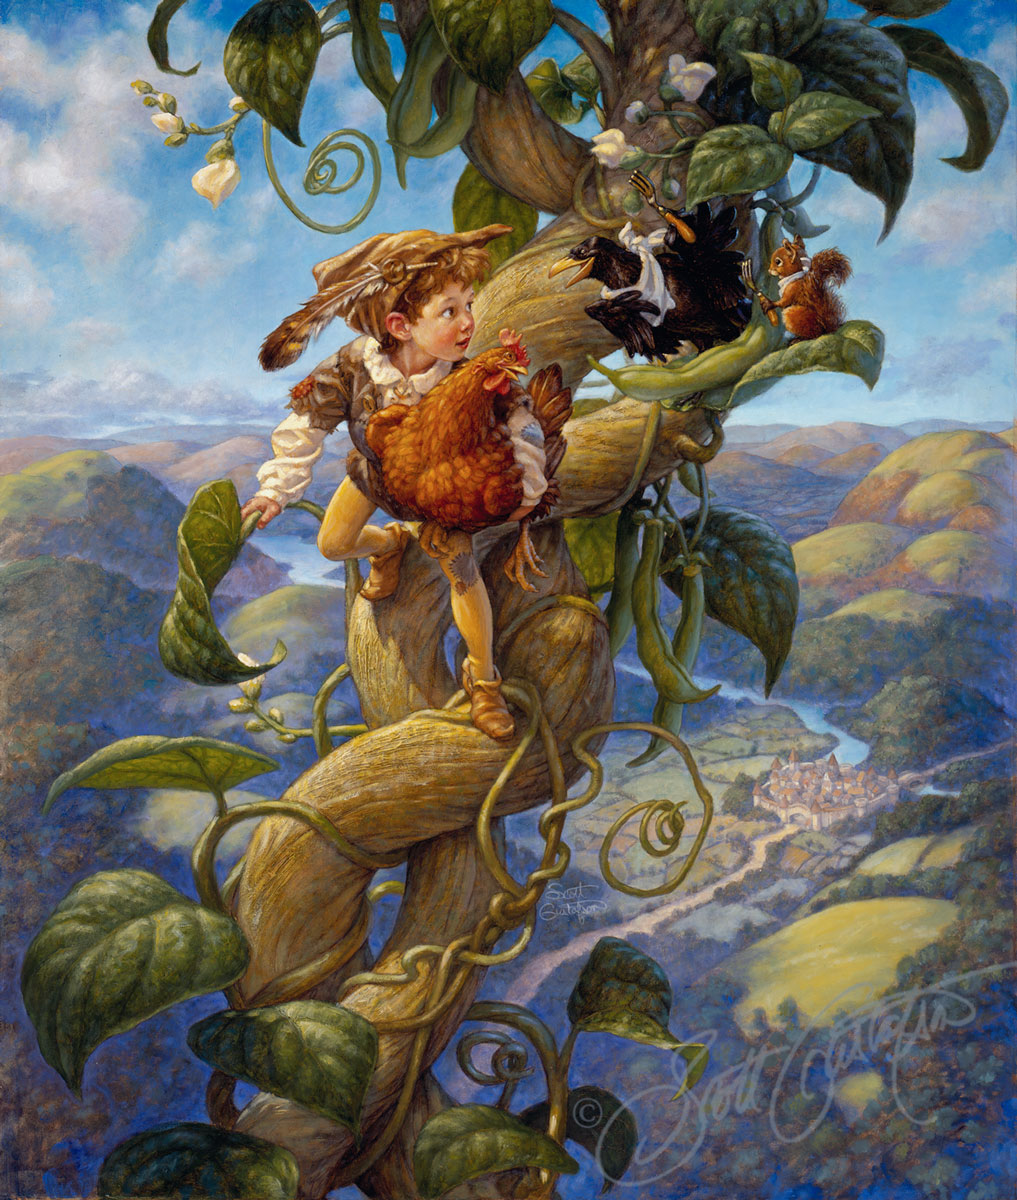 Copy of Jack and the Beanstalk